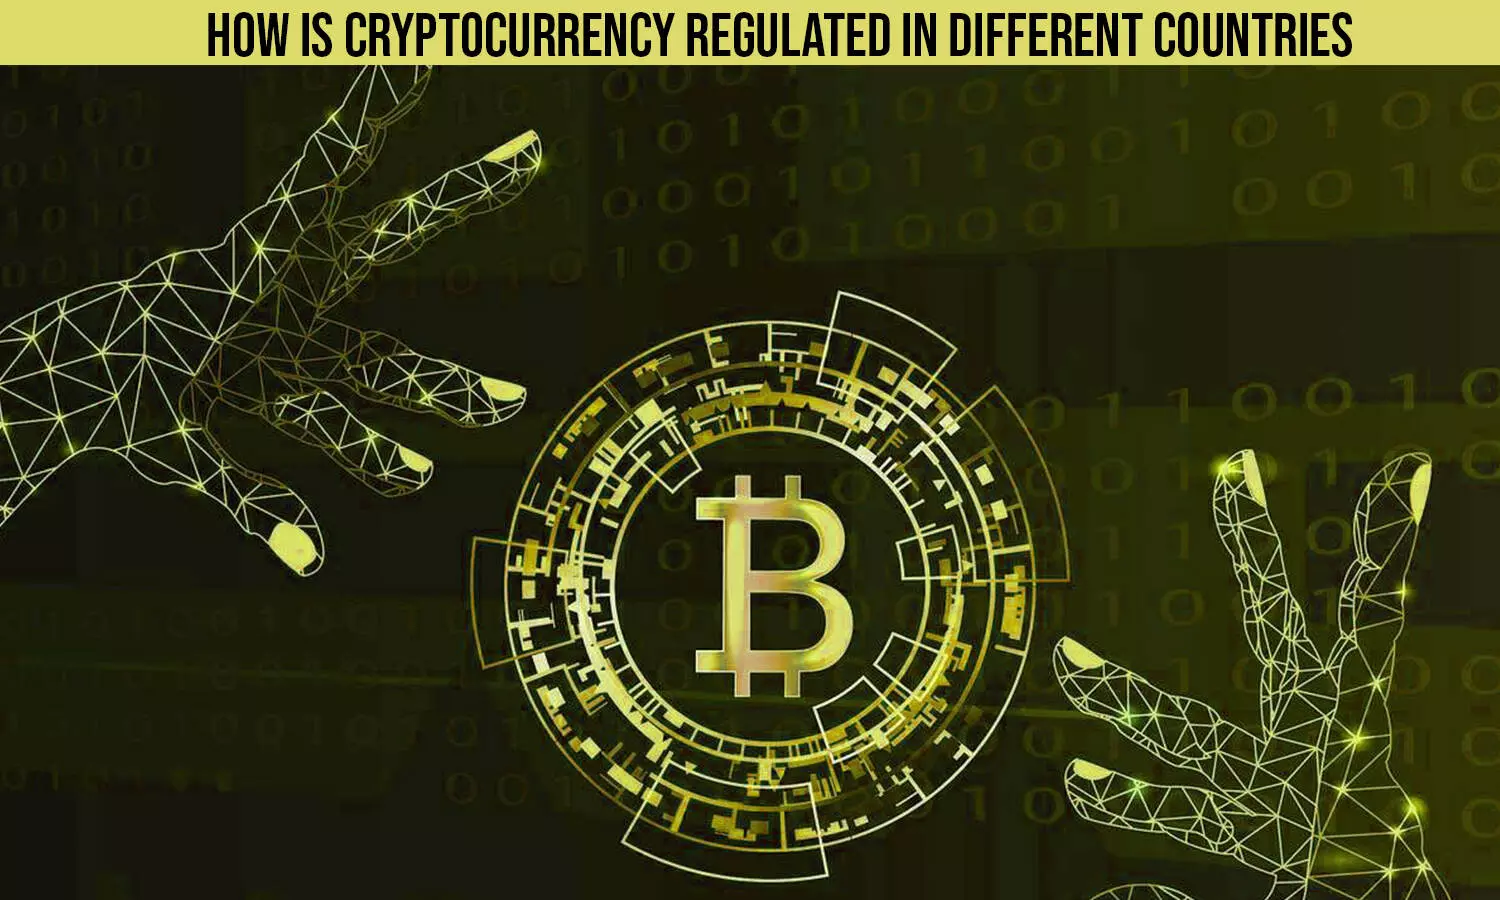 How Is Cryptocurrency Regulated in Different Countries?